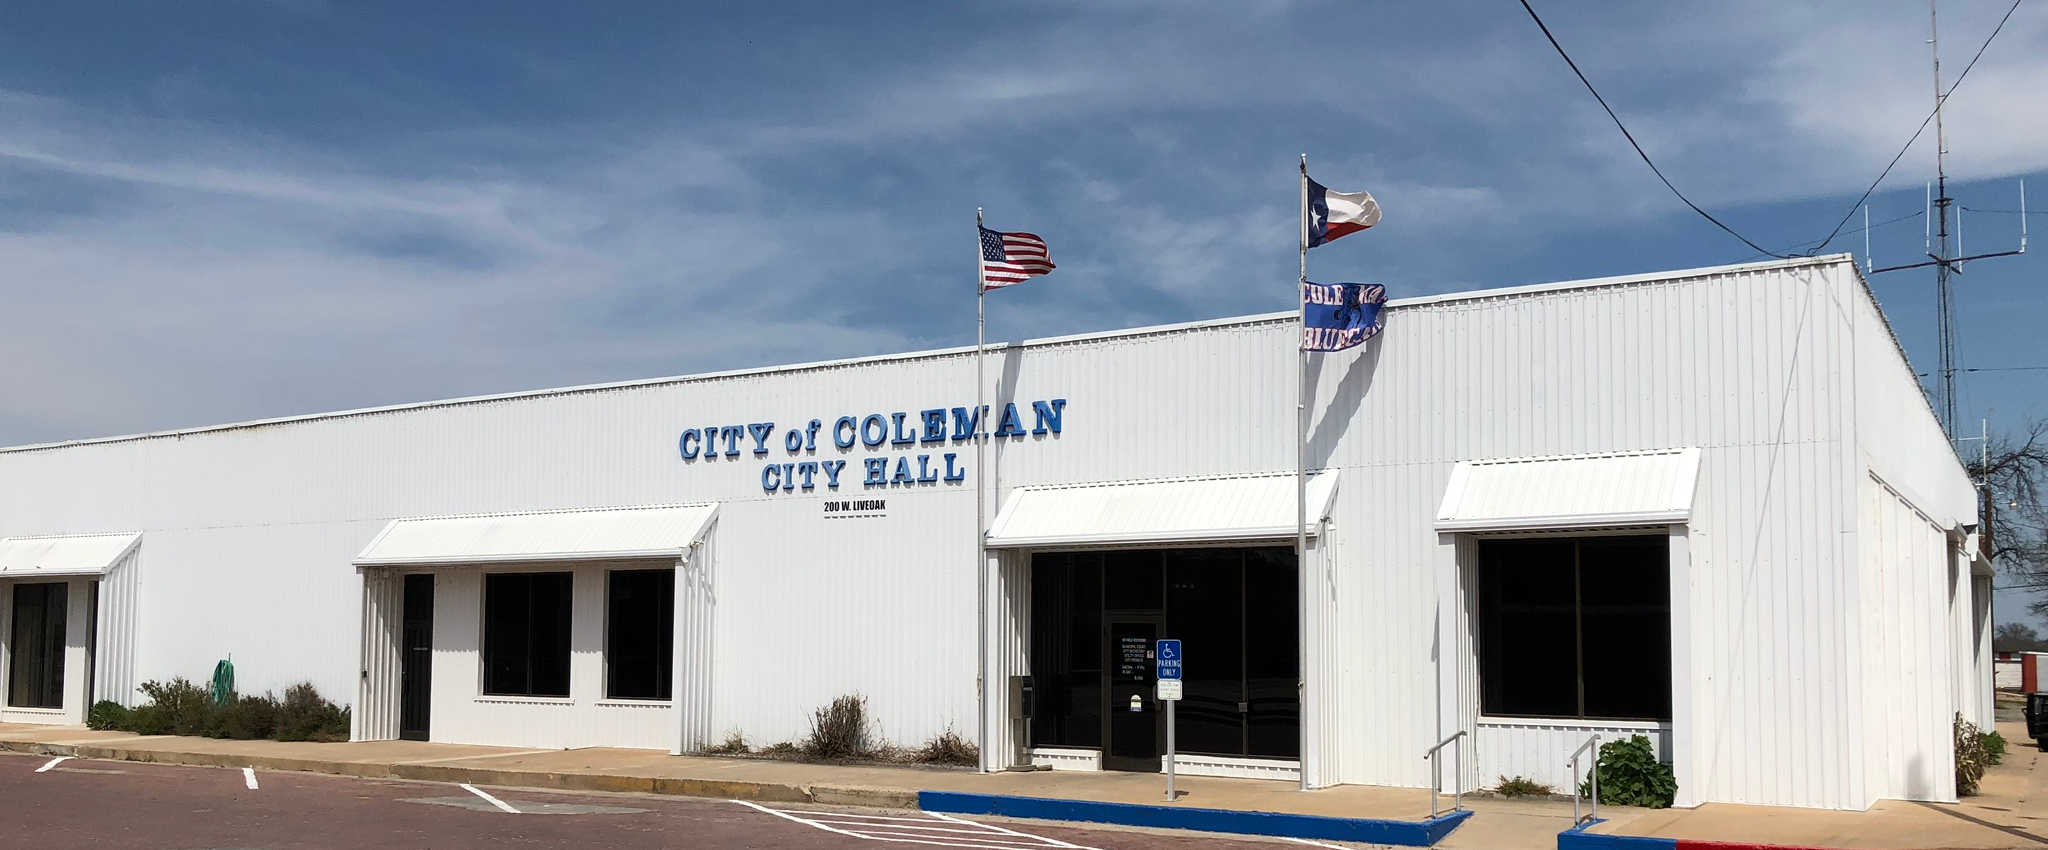 to the City of Coleman, Texas